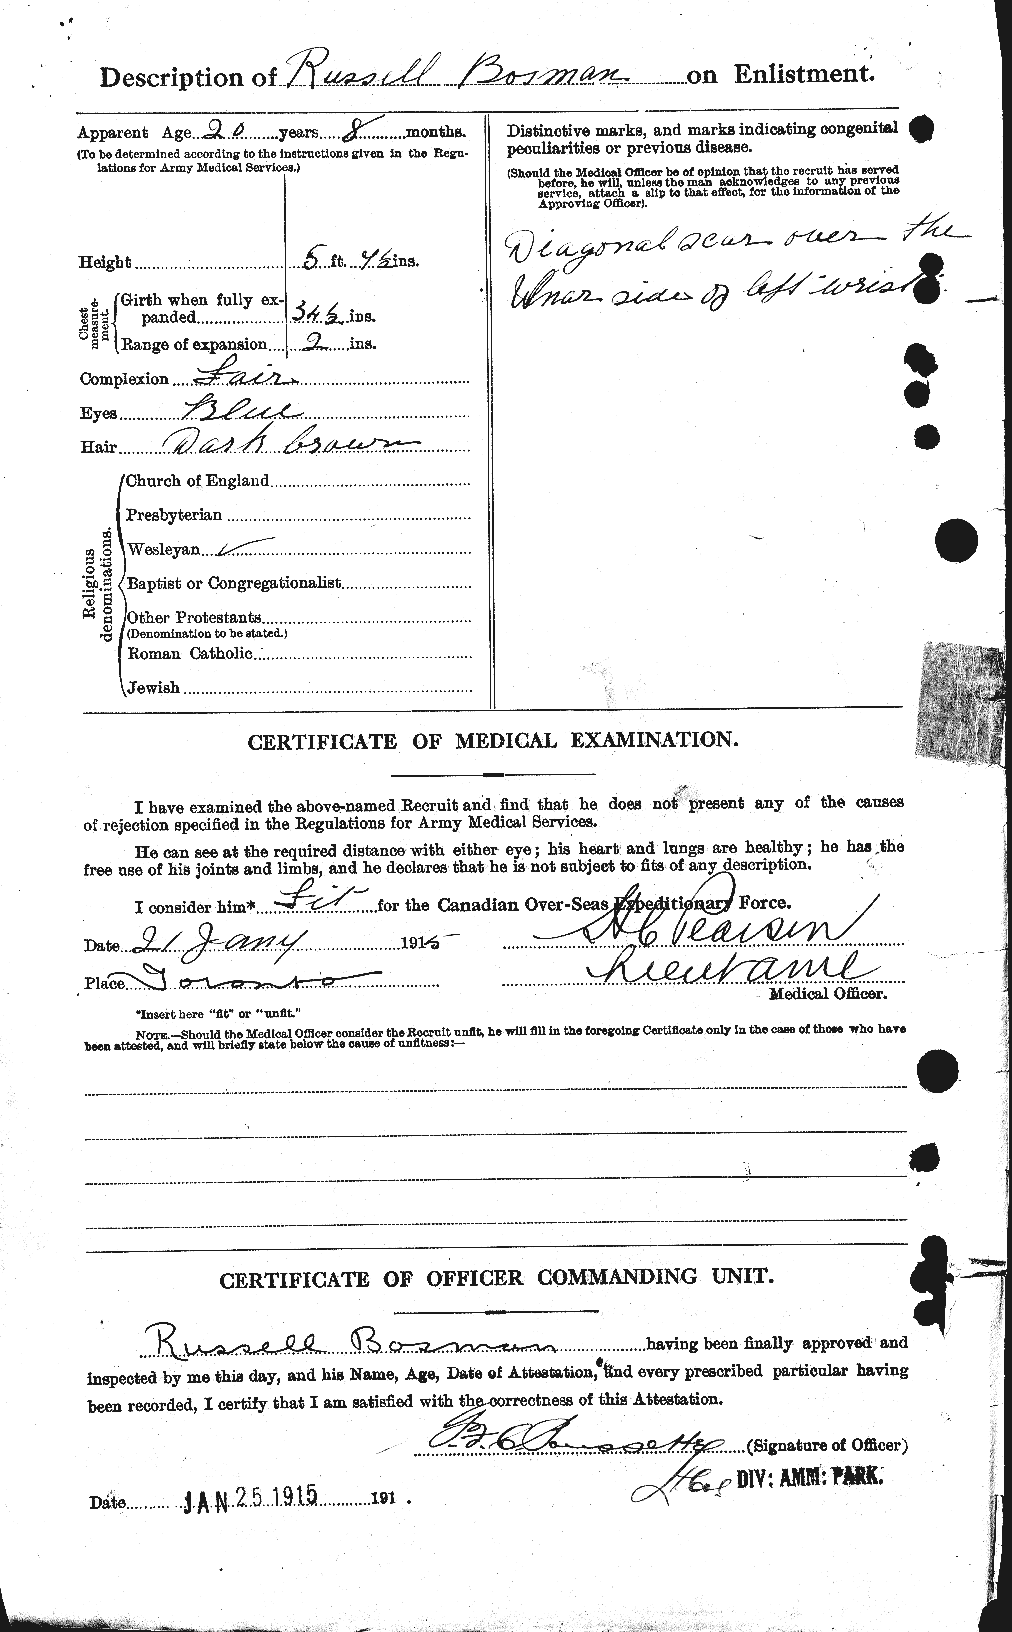 Personnel Records of the First World War - CEF 251797b